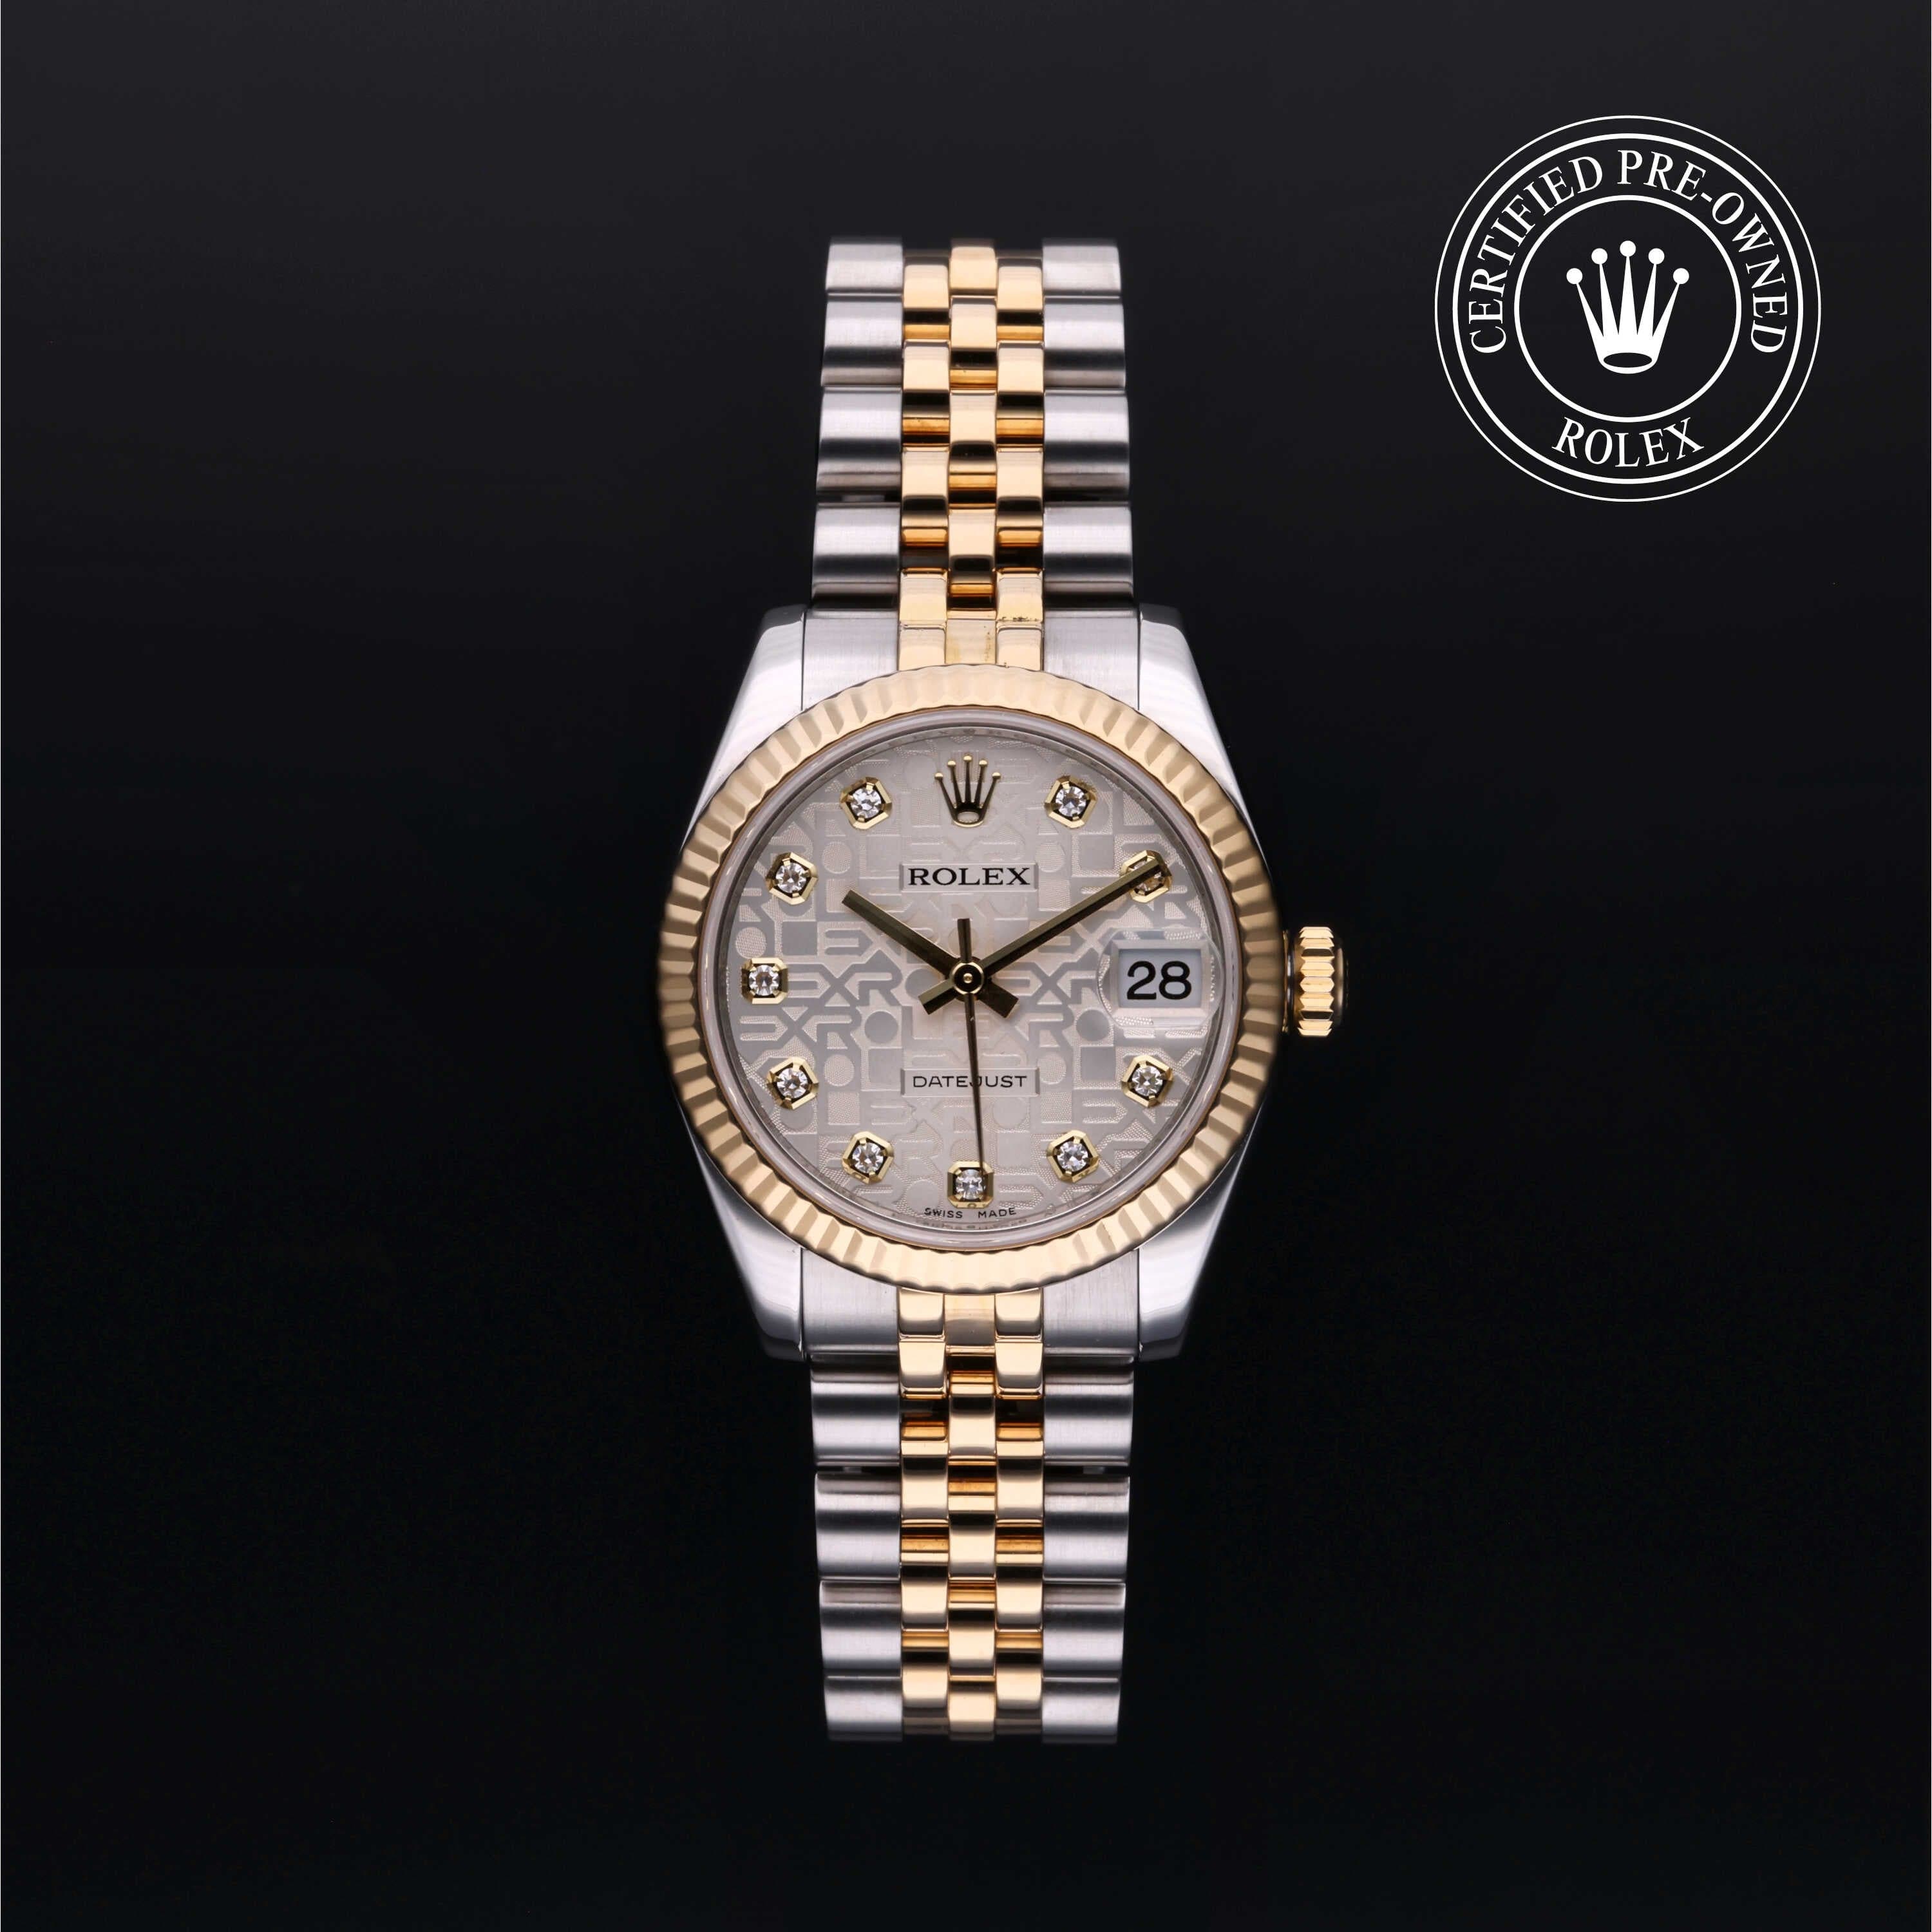 Rolex Certified Pre-Owned Datejust in Jubilee, 31 mm, Stainless Steel and yellow gold watch